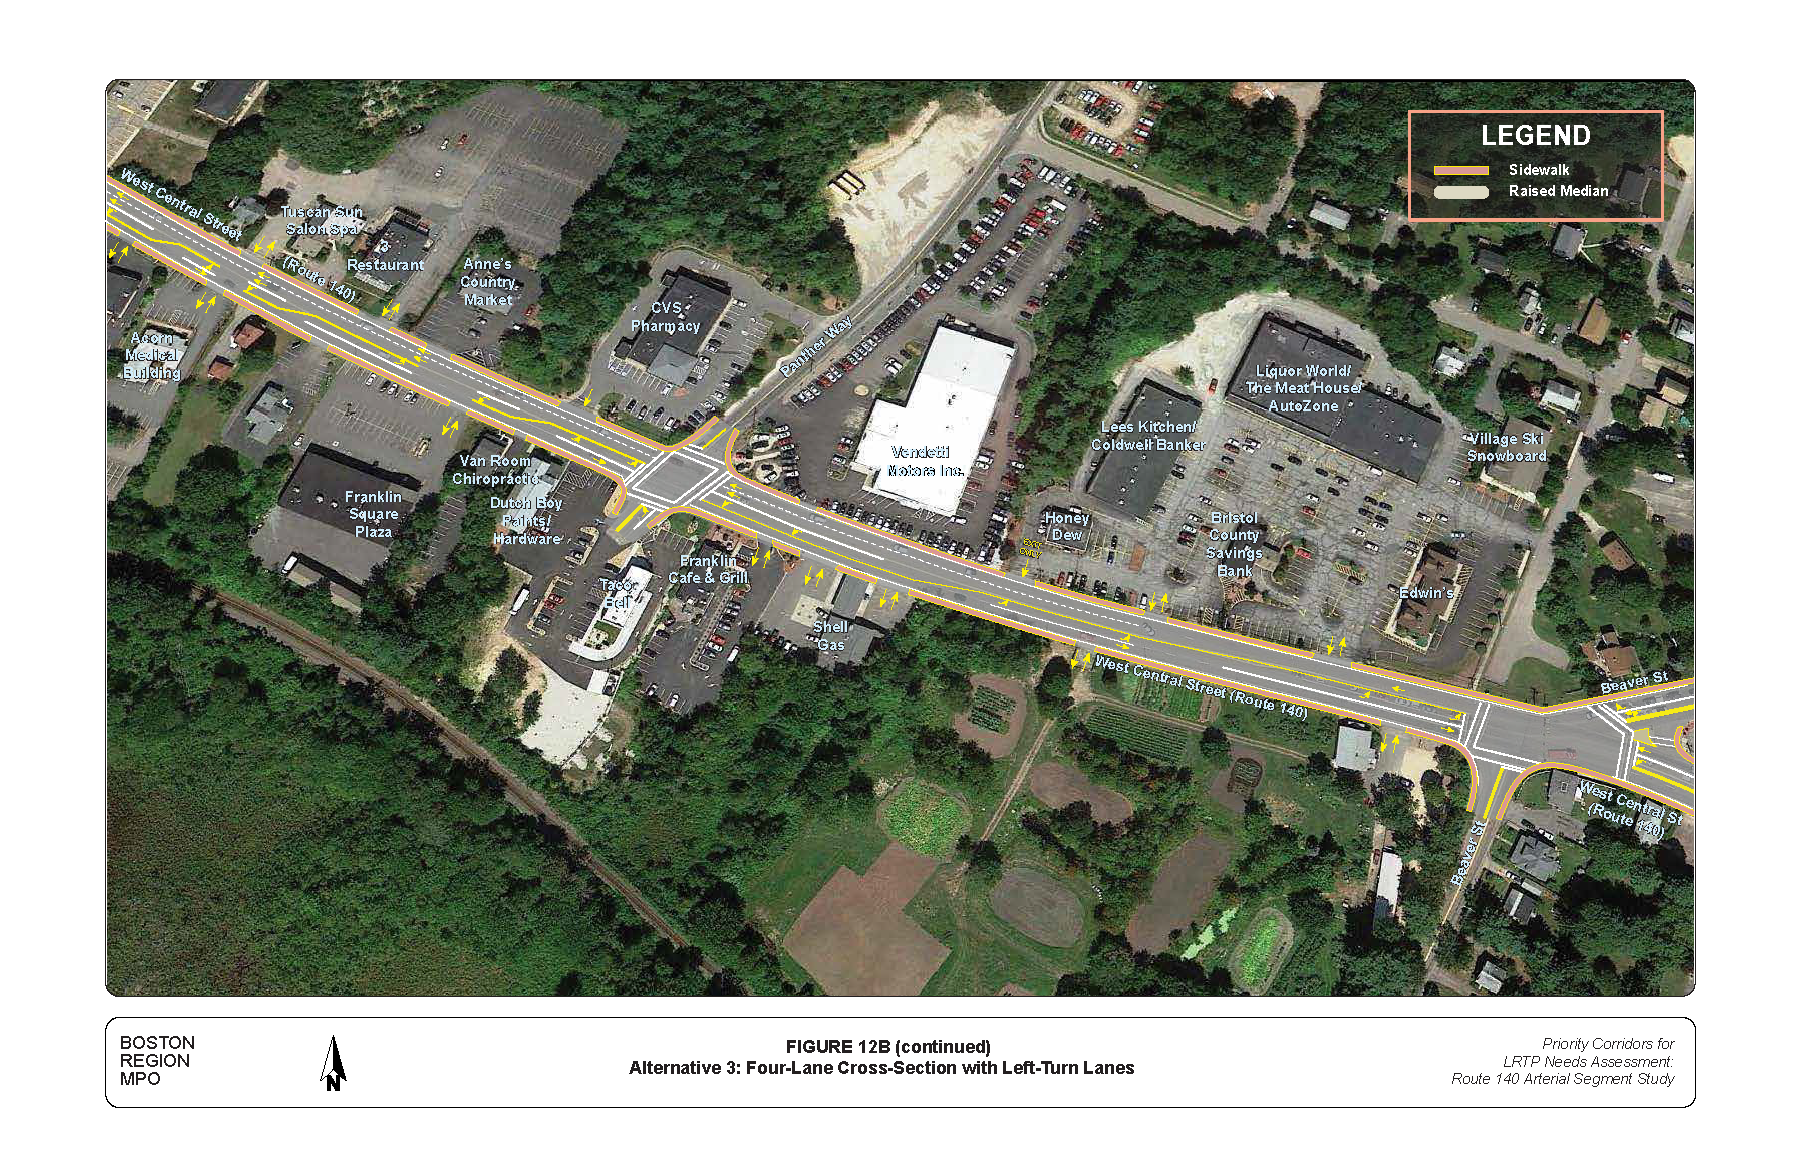 FIGURE 12B (continued): Alternative 3: Four-Lane Cross-Section with Left-Turn Lanes. Aerial-view map that illustrates MPO staff “Improvement Alternative 3,” which recommends reconfiguring West Central Street into a three-lane cross-section with left-turn lanes.